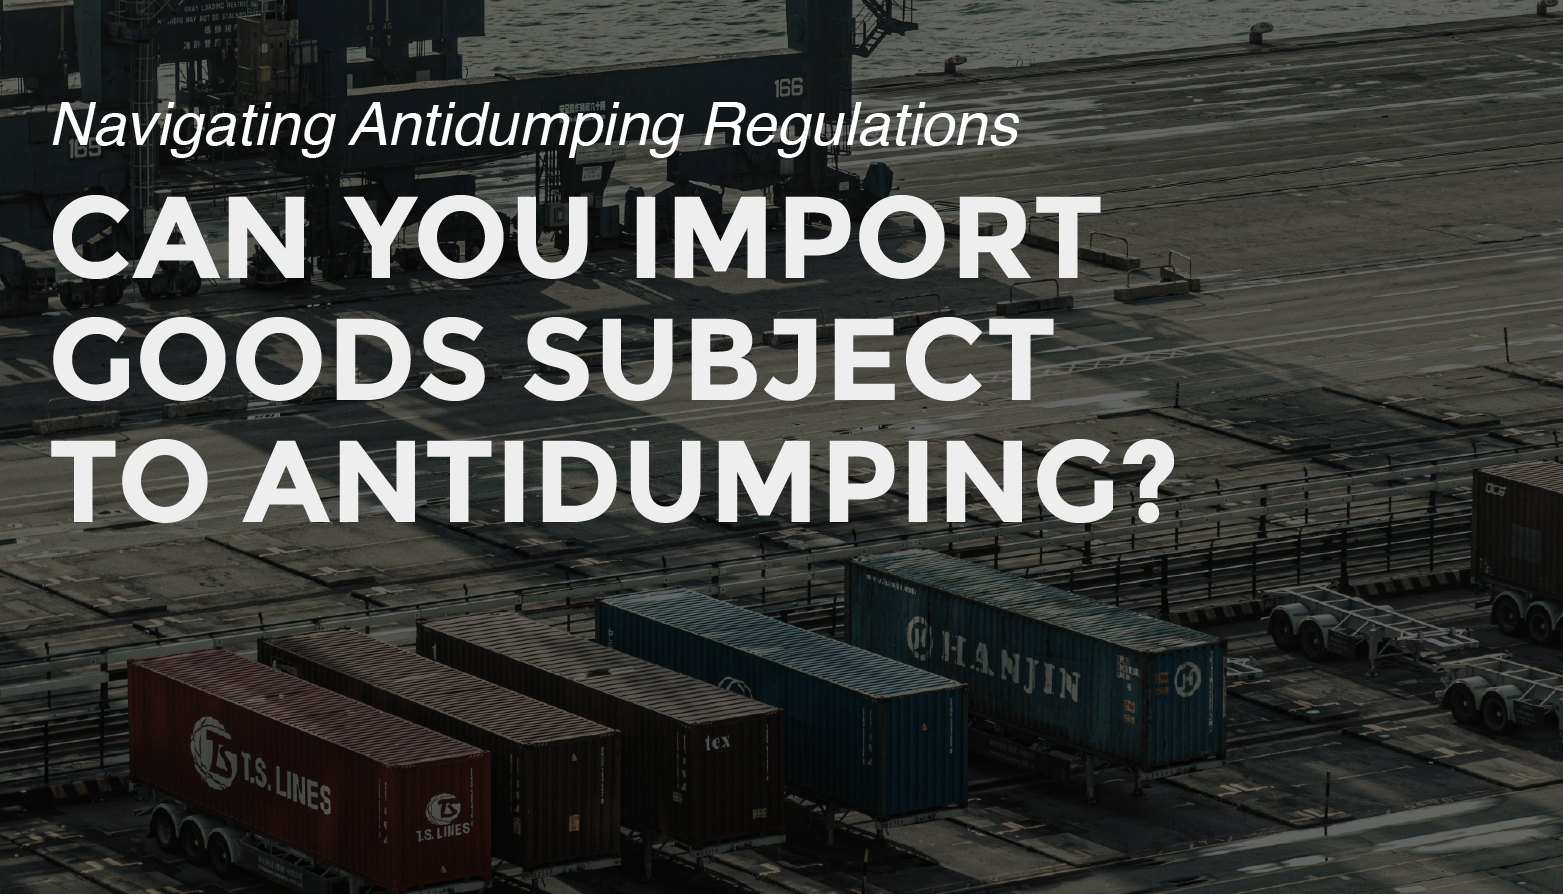 Can you import antidumped goods into the United States?